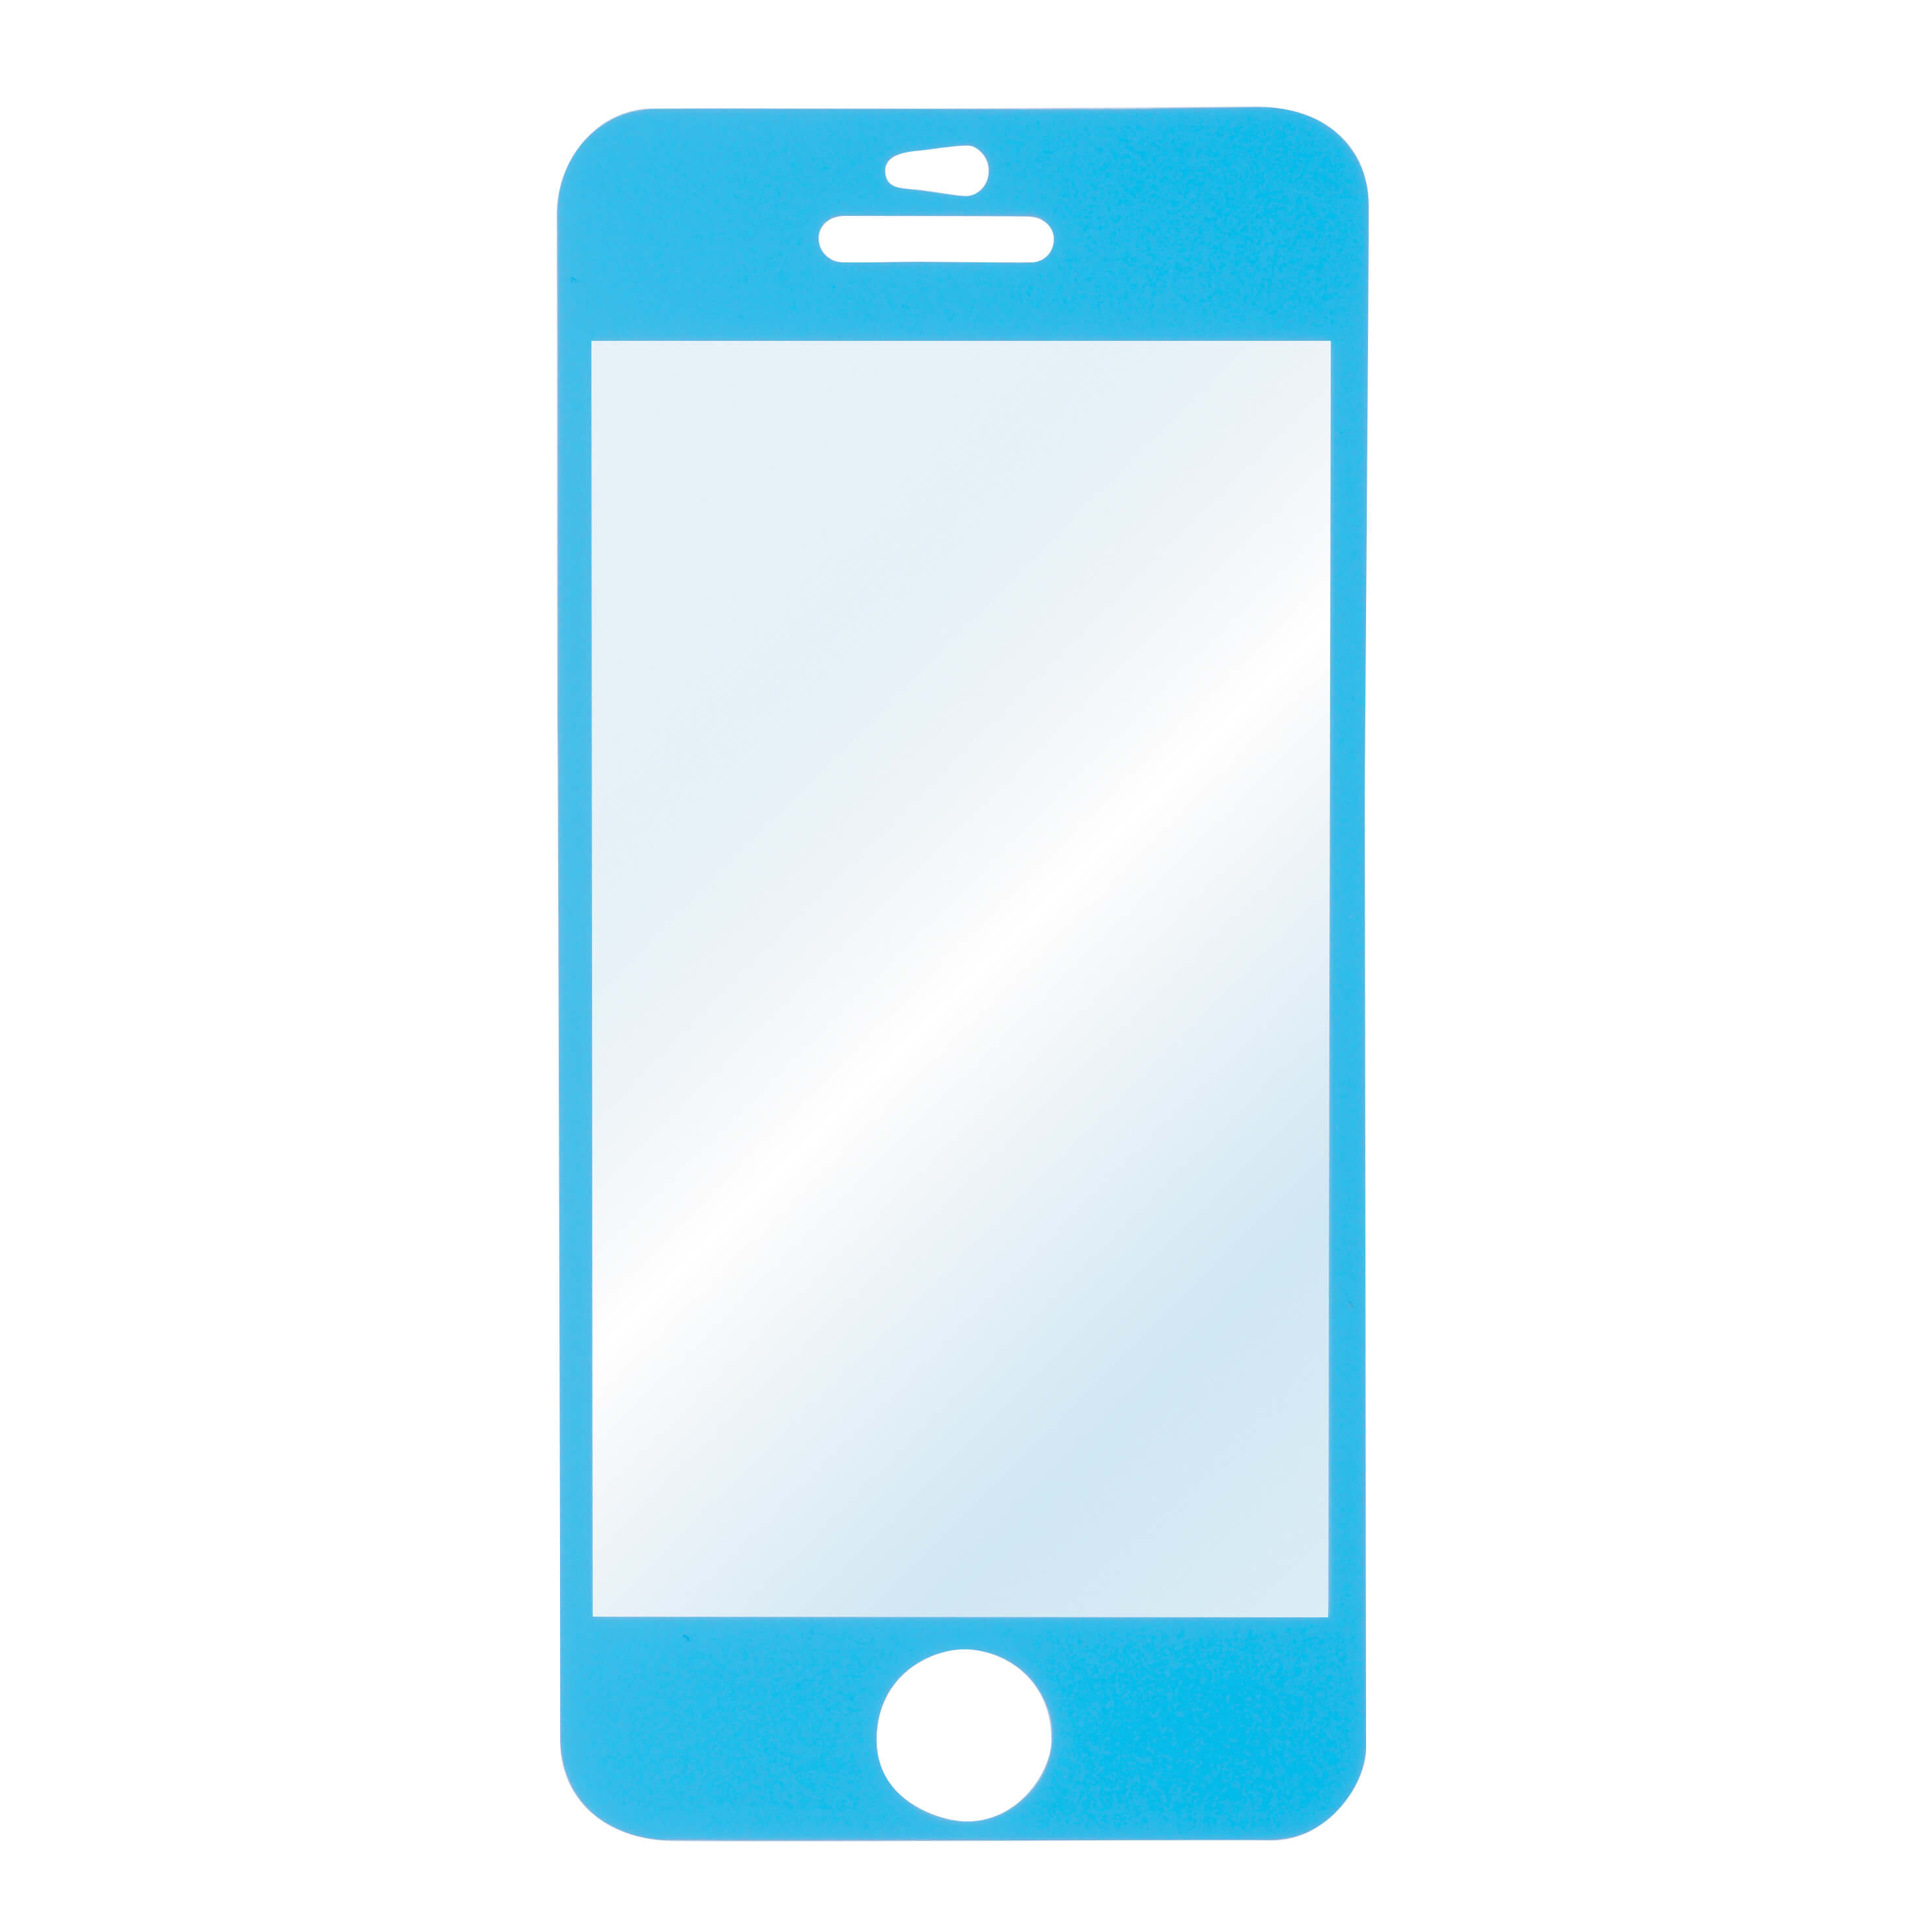 Color Screen Protector for Ap ple iPhone 5c, blue